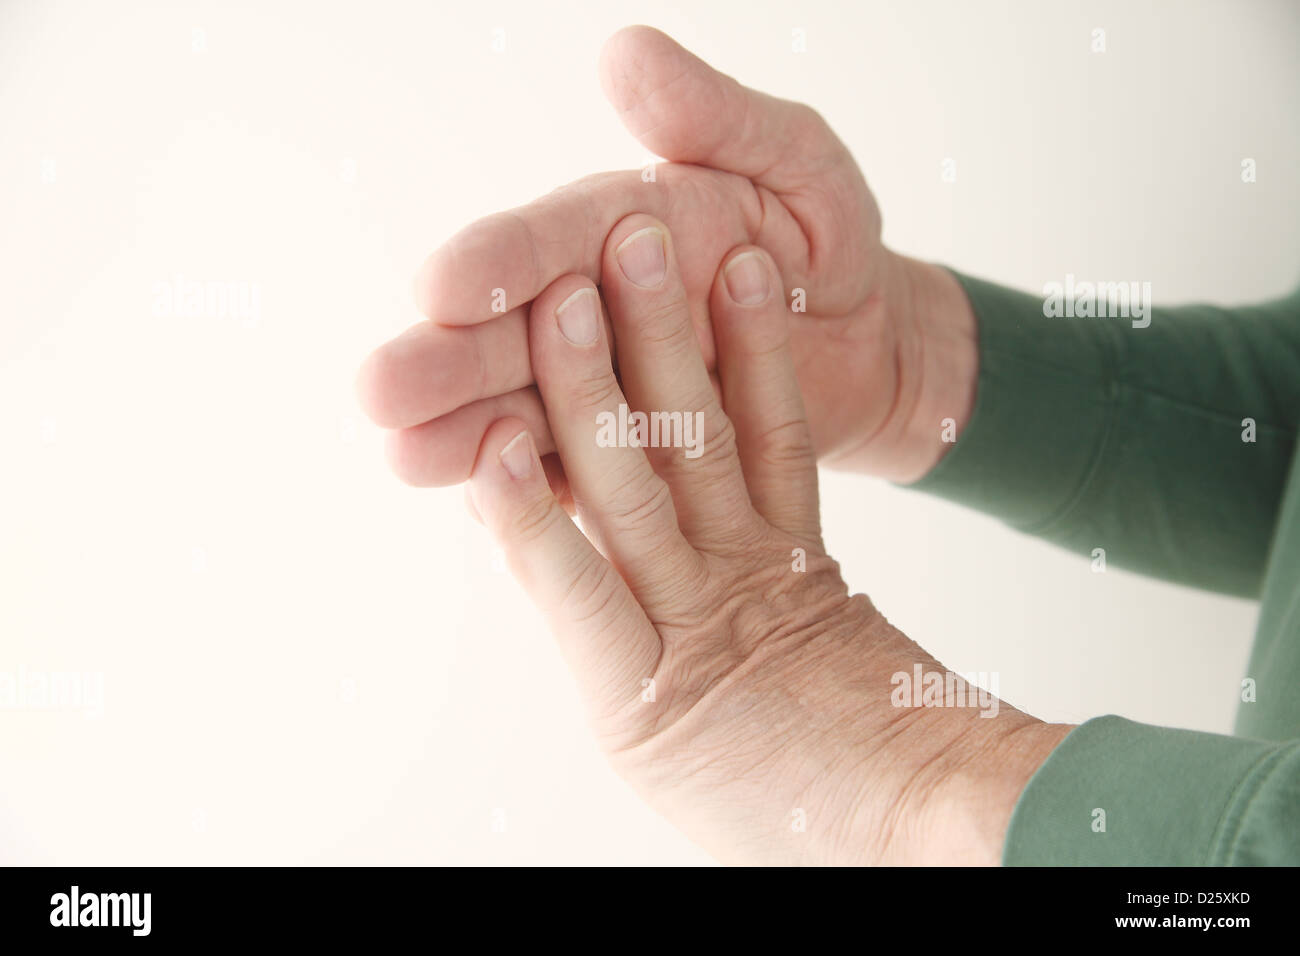 a senior man stretching his fingers Stock Photo